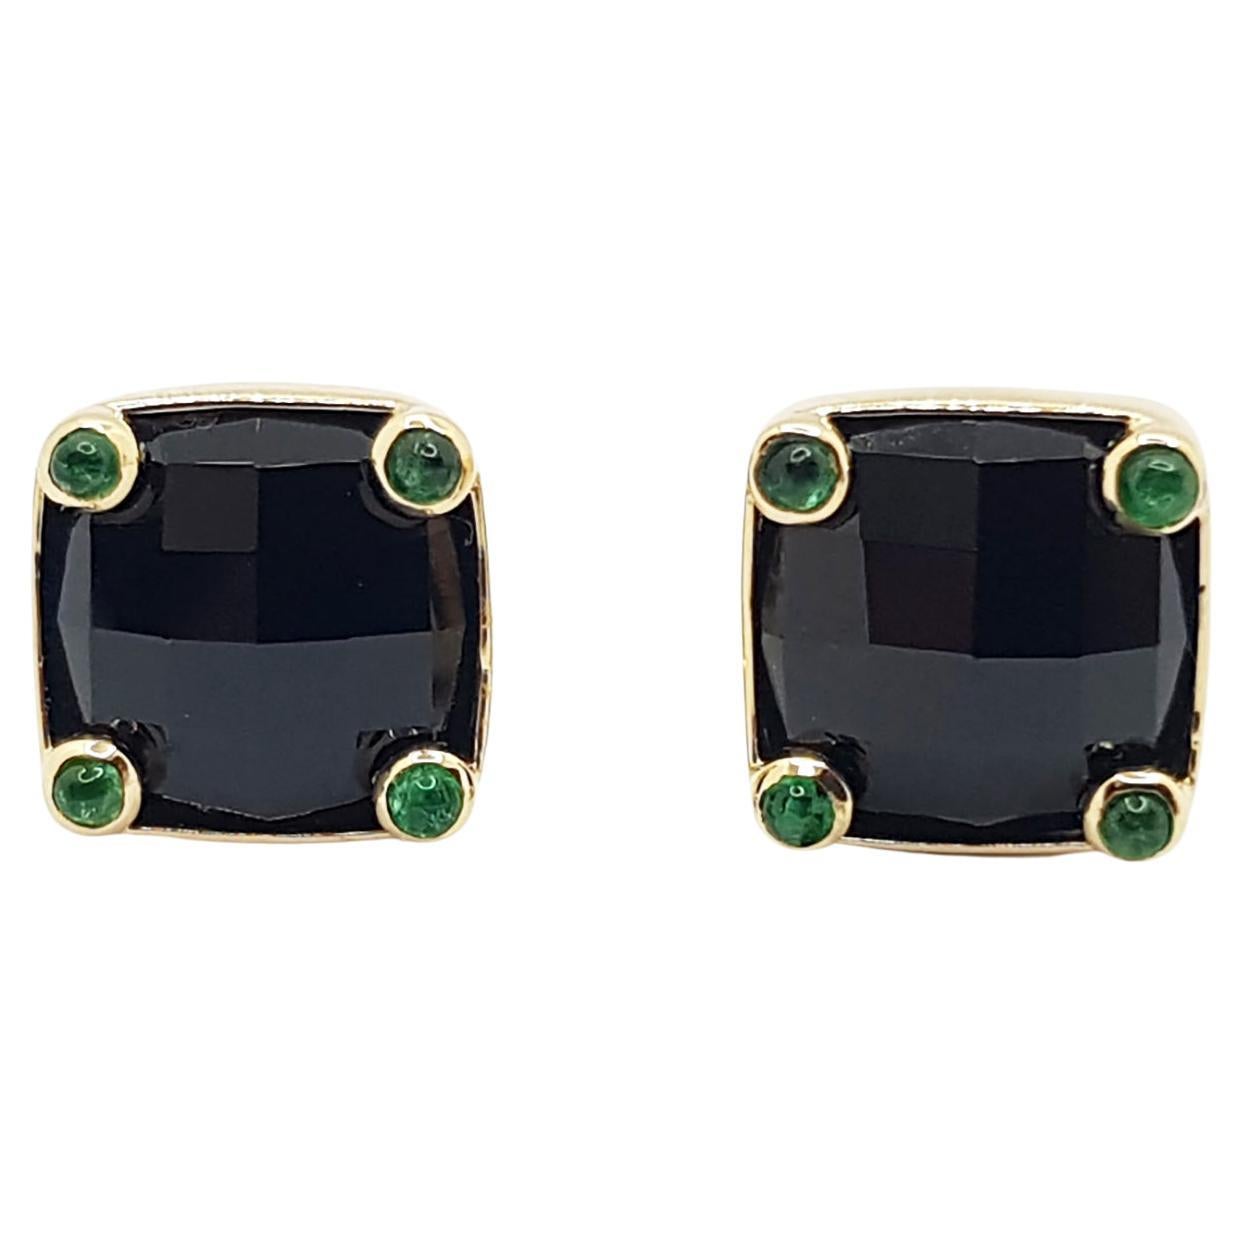 Onyx with Cabochon Emerald Earrings Set in 18 Karat Gold Settings